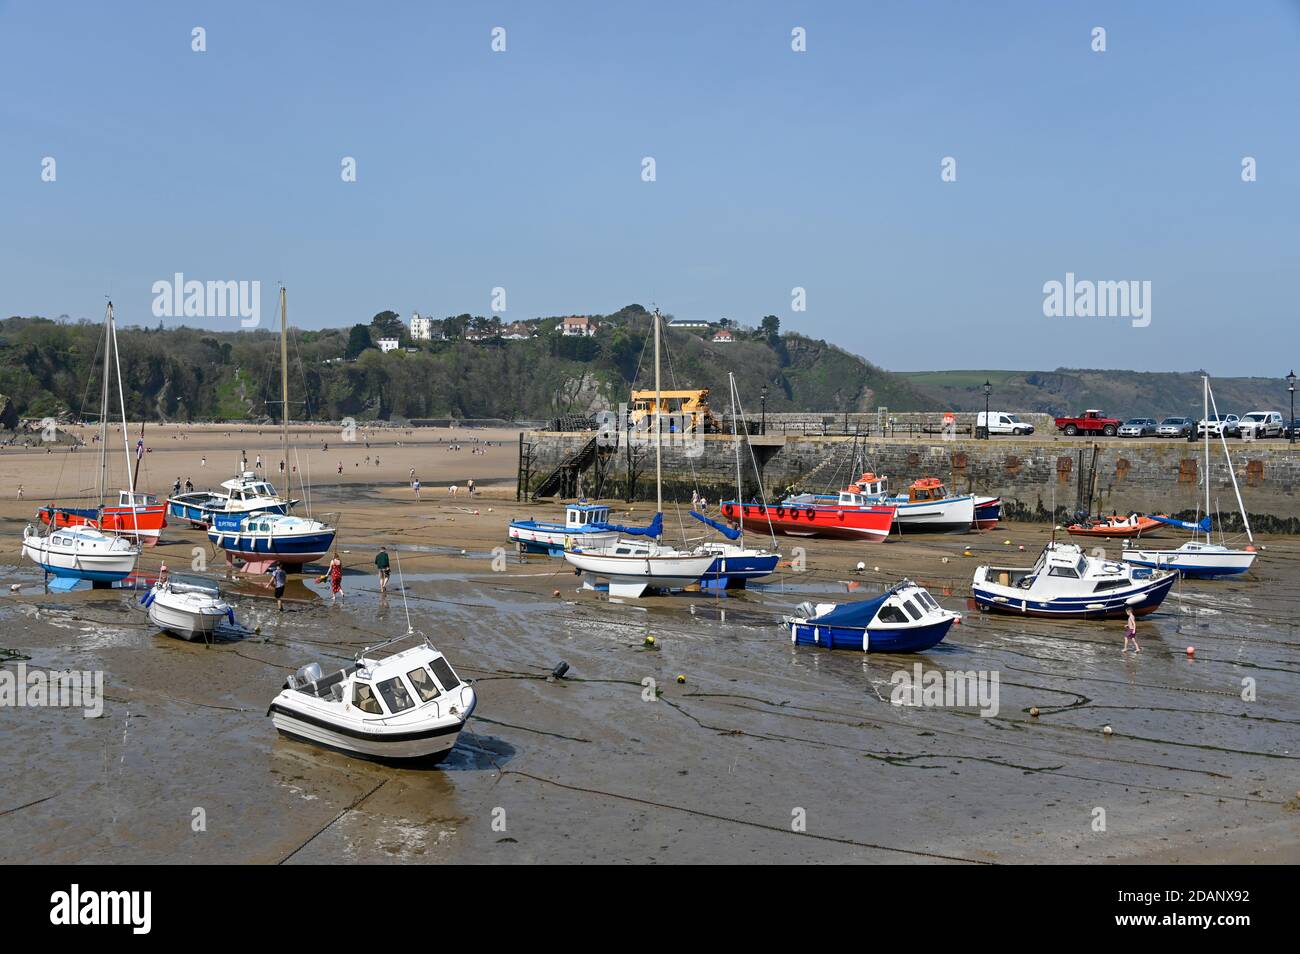 Tenby, Wales - April 15 2019 : The boats in Tenby Harbour at low tide showing the mooring lines. Stock Photo